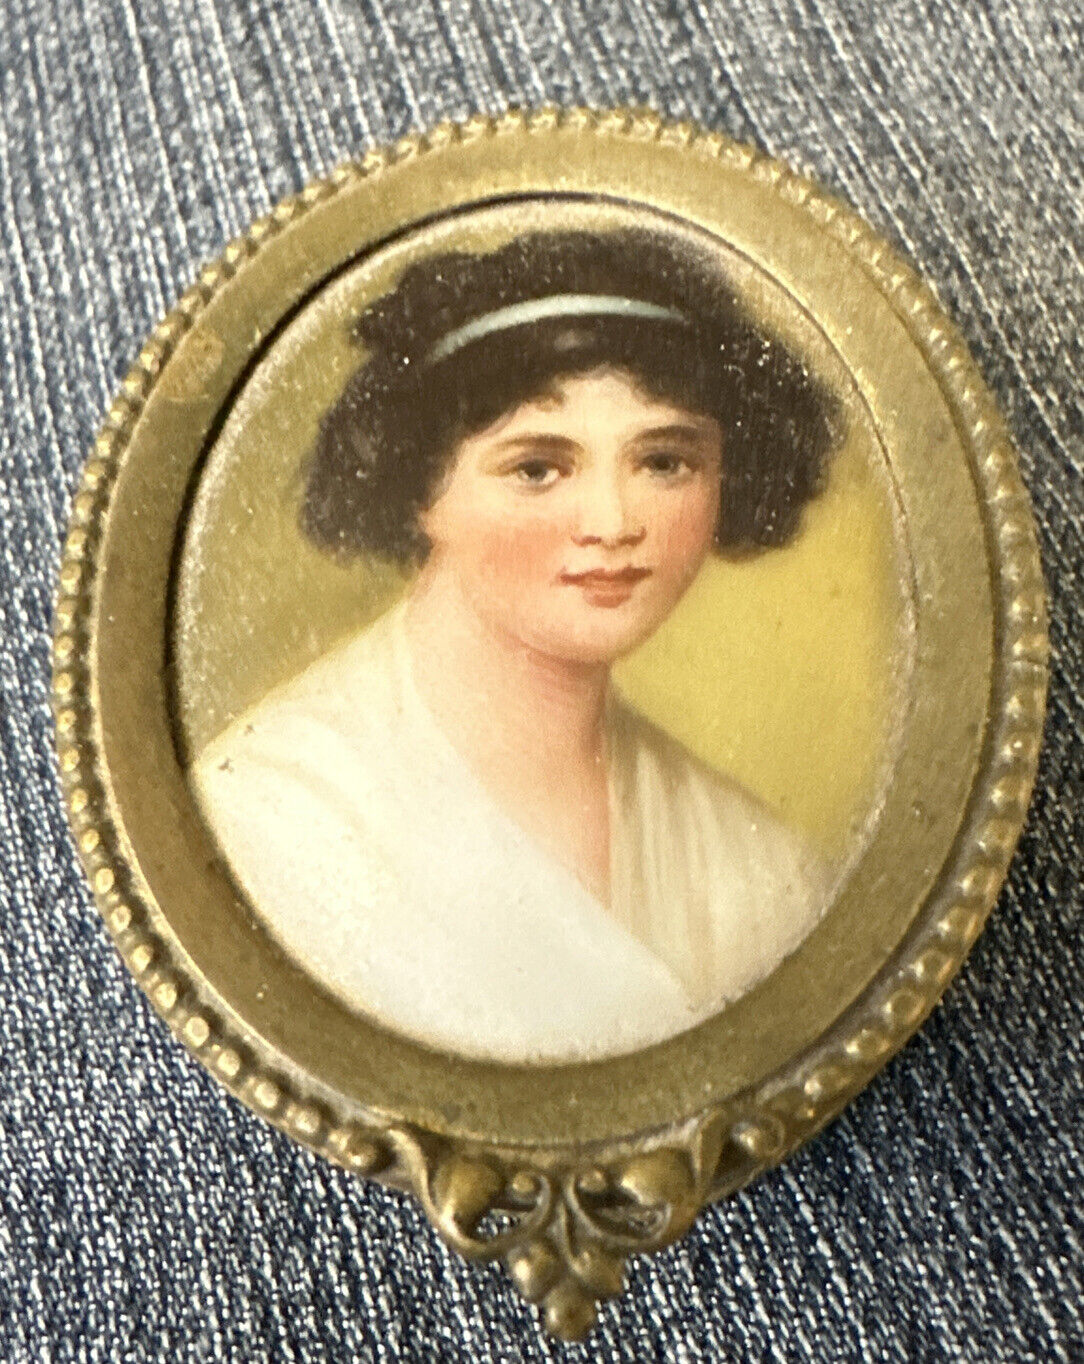 Antique Trinket Brass Miniature Lithograph? dark haired young woman 2” painted?